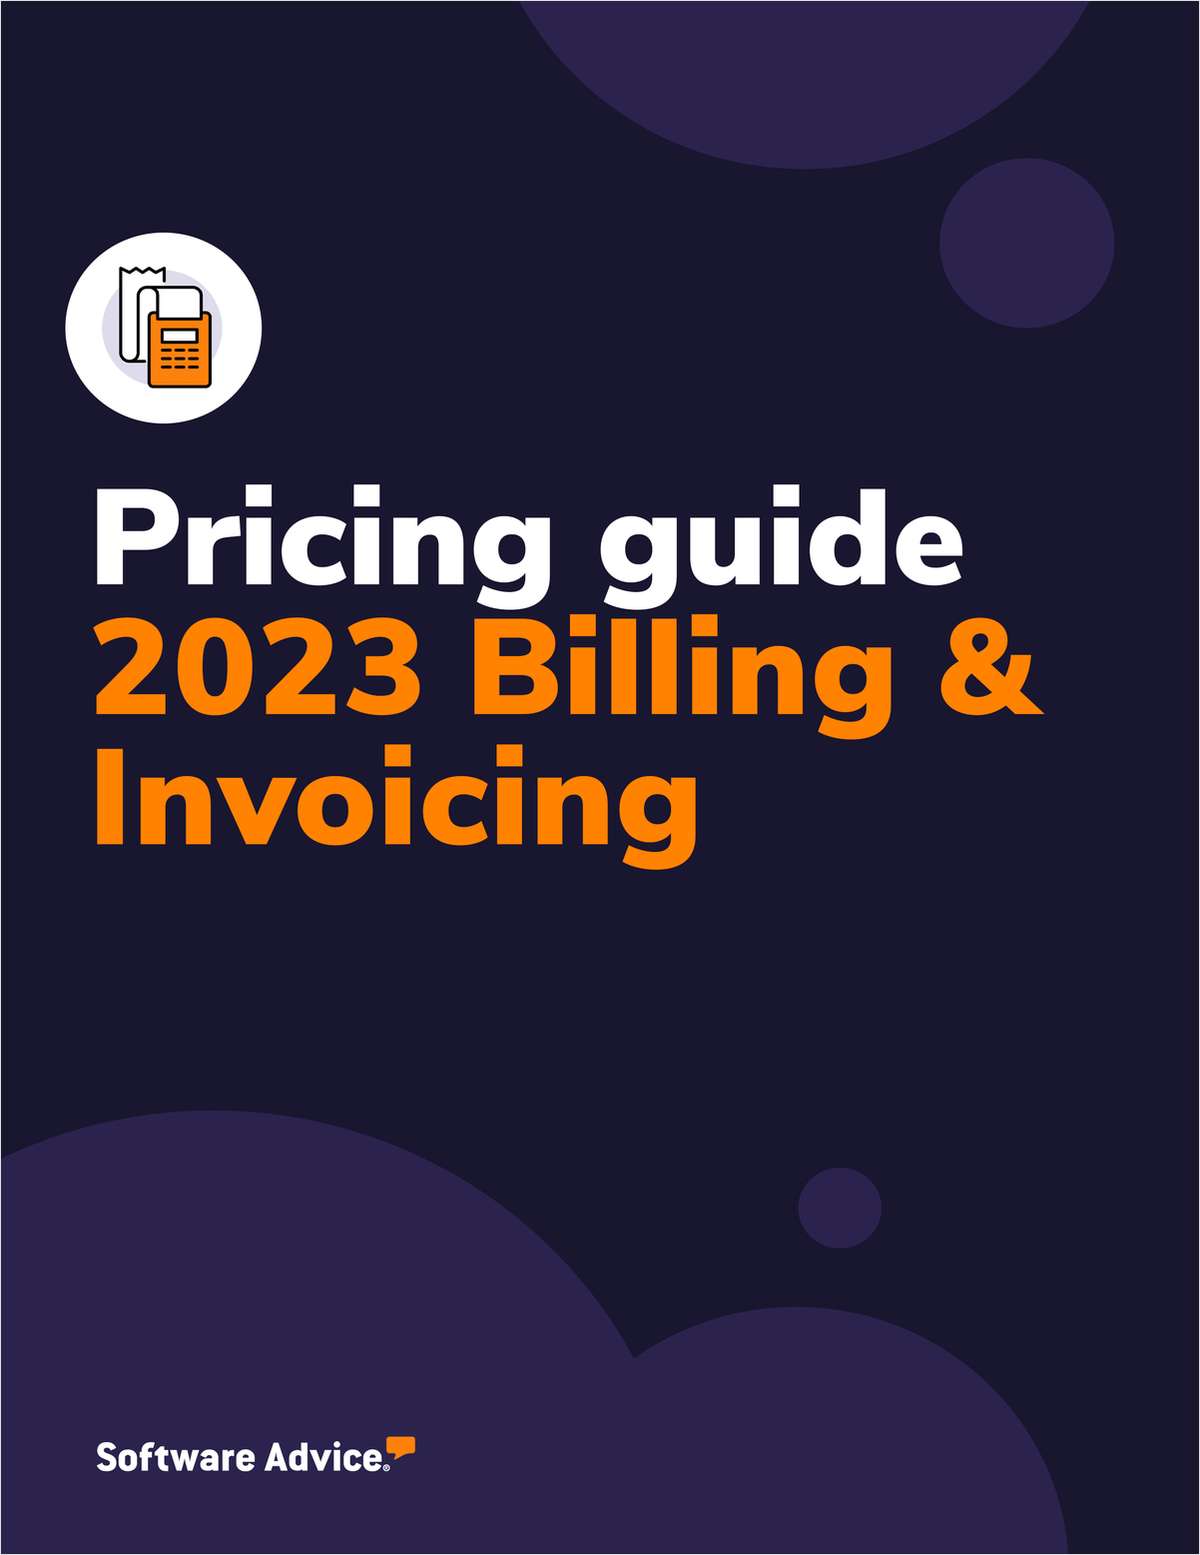 Don't Overpay: What to Know About Billing and Invoicing Software Prices in 2023